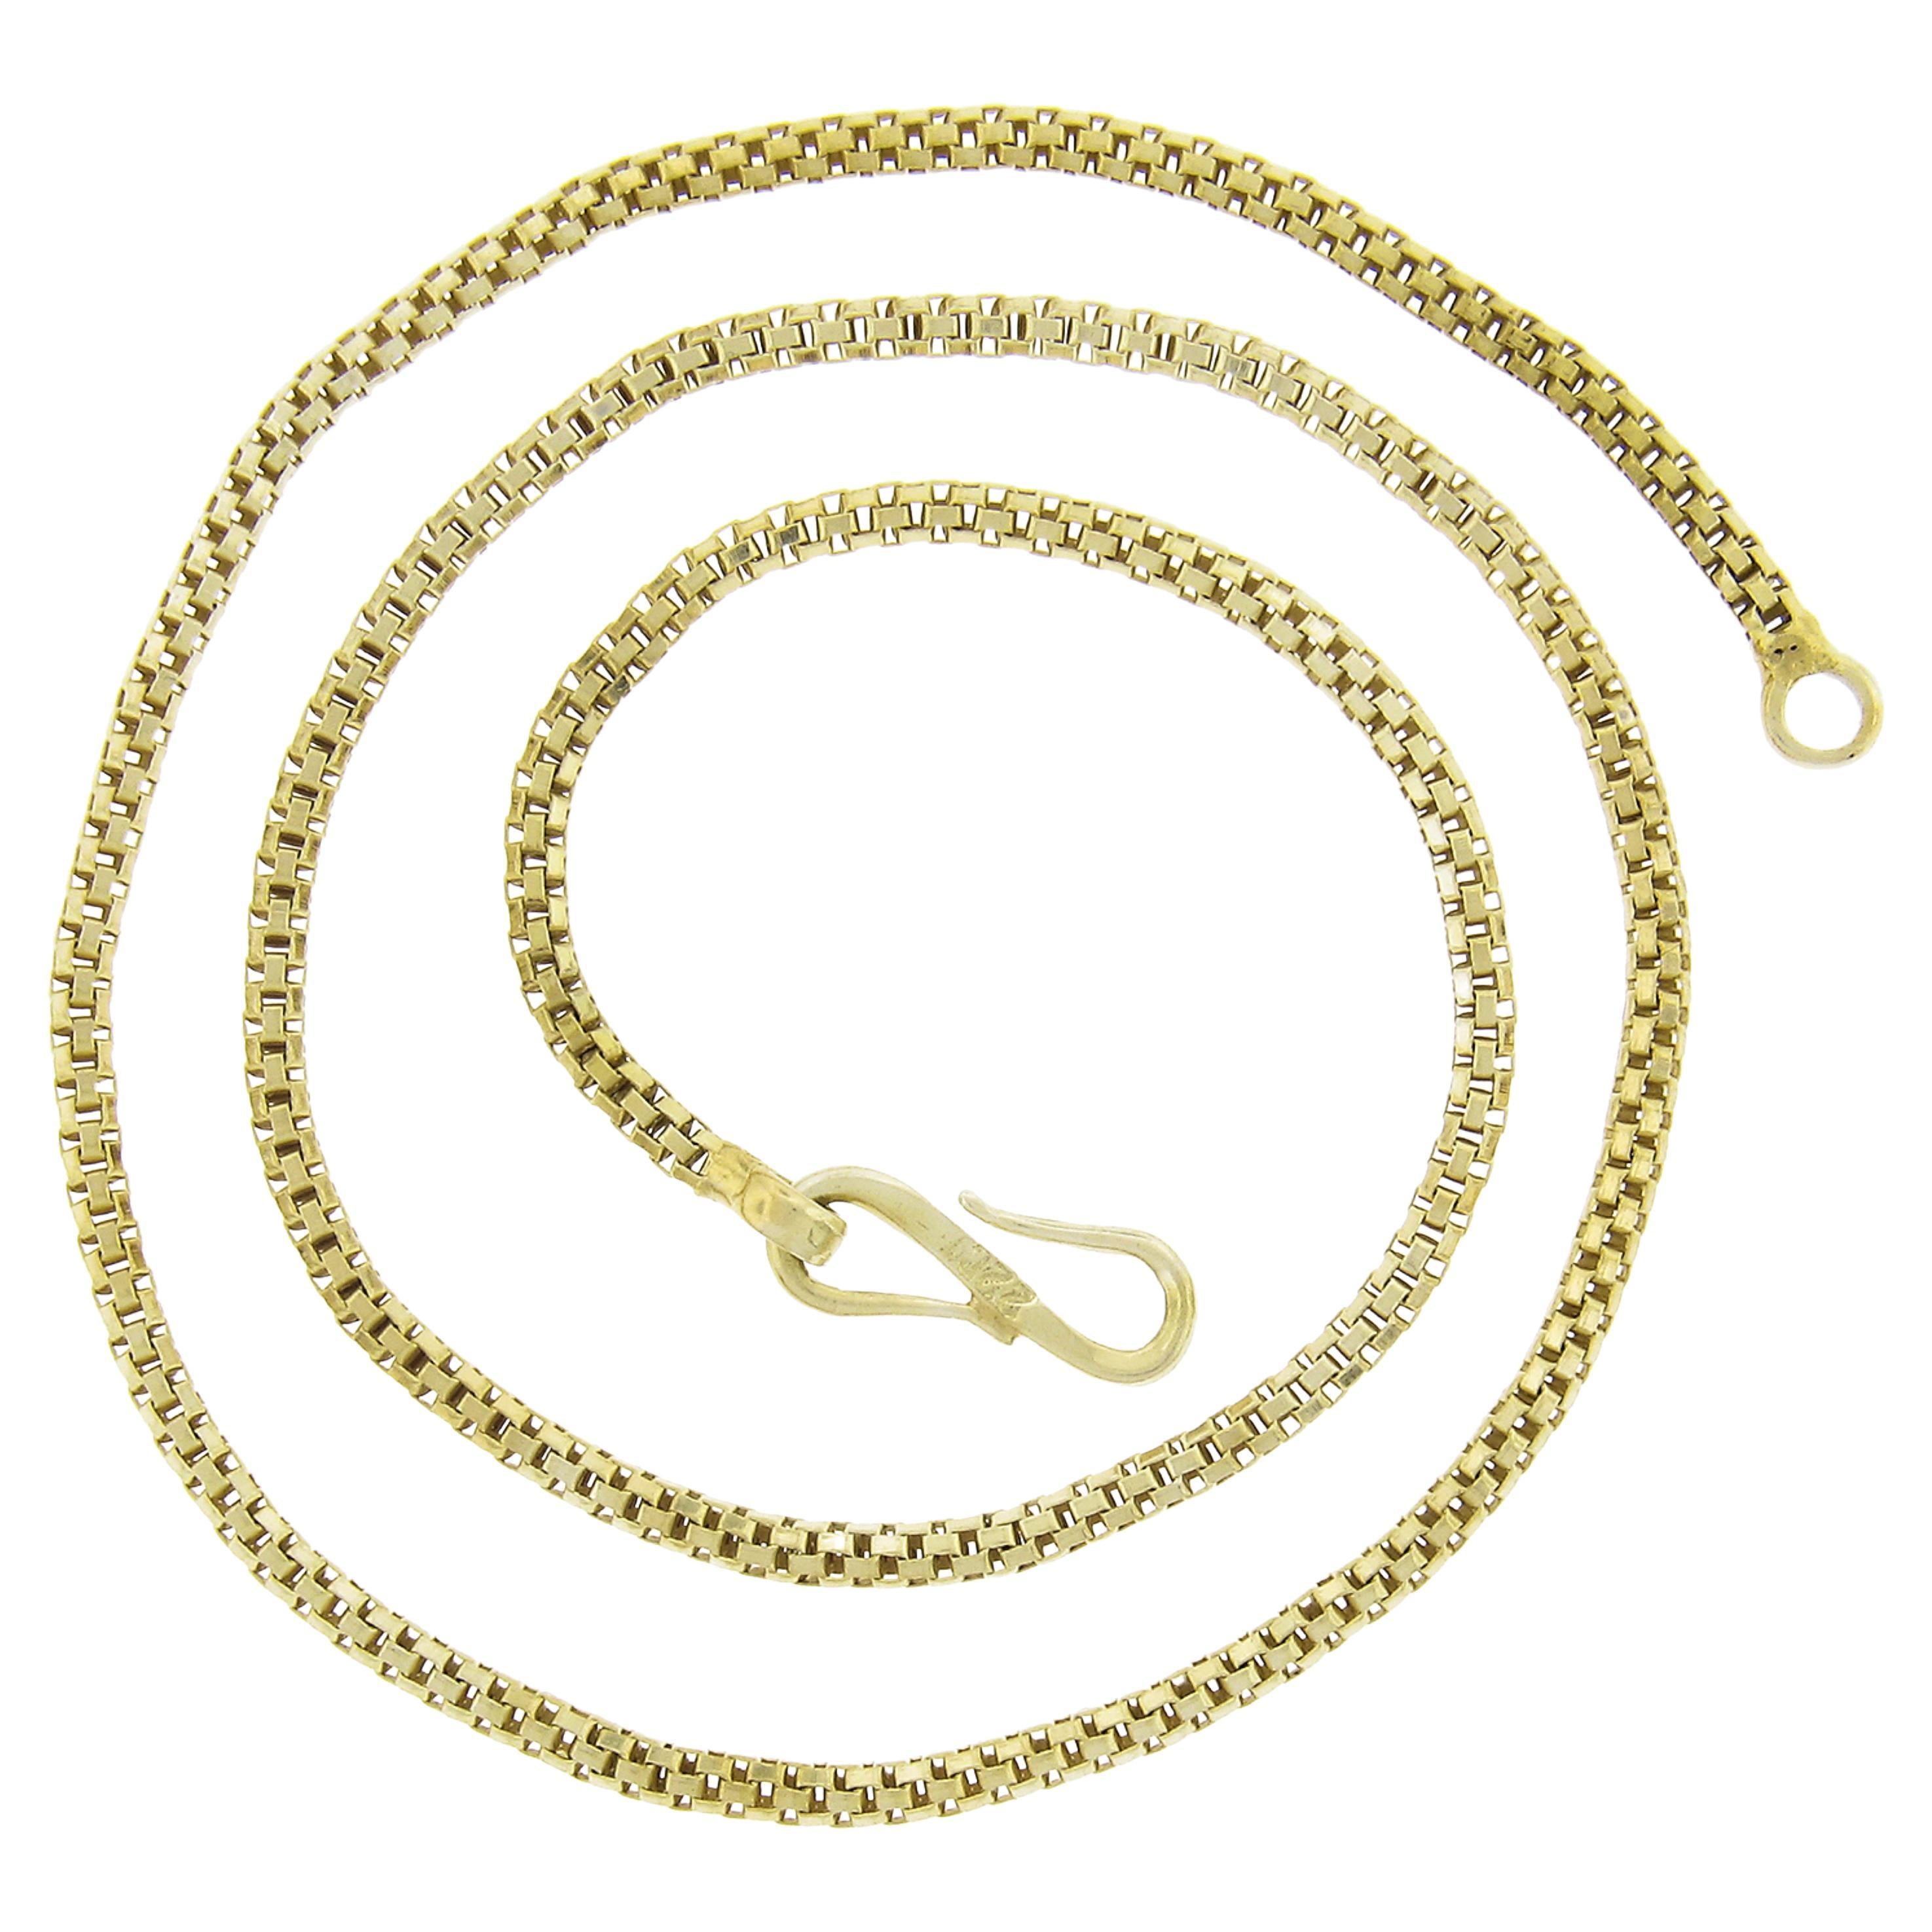 22k Yellow Gold 19" Popcorn Like Tube Link Chain Necklace W/ Sister Hook Clasp For Sale